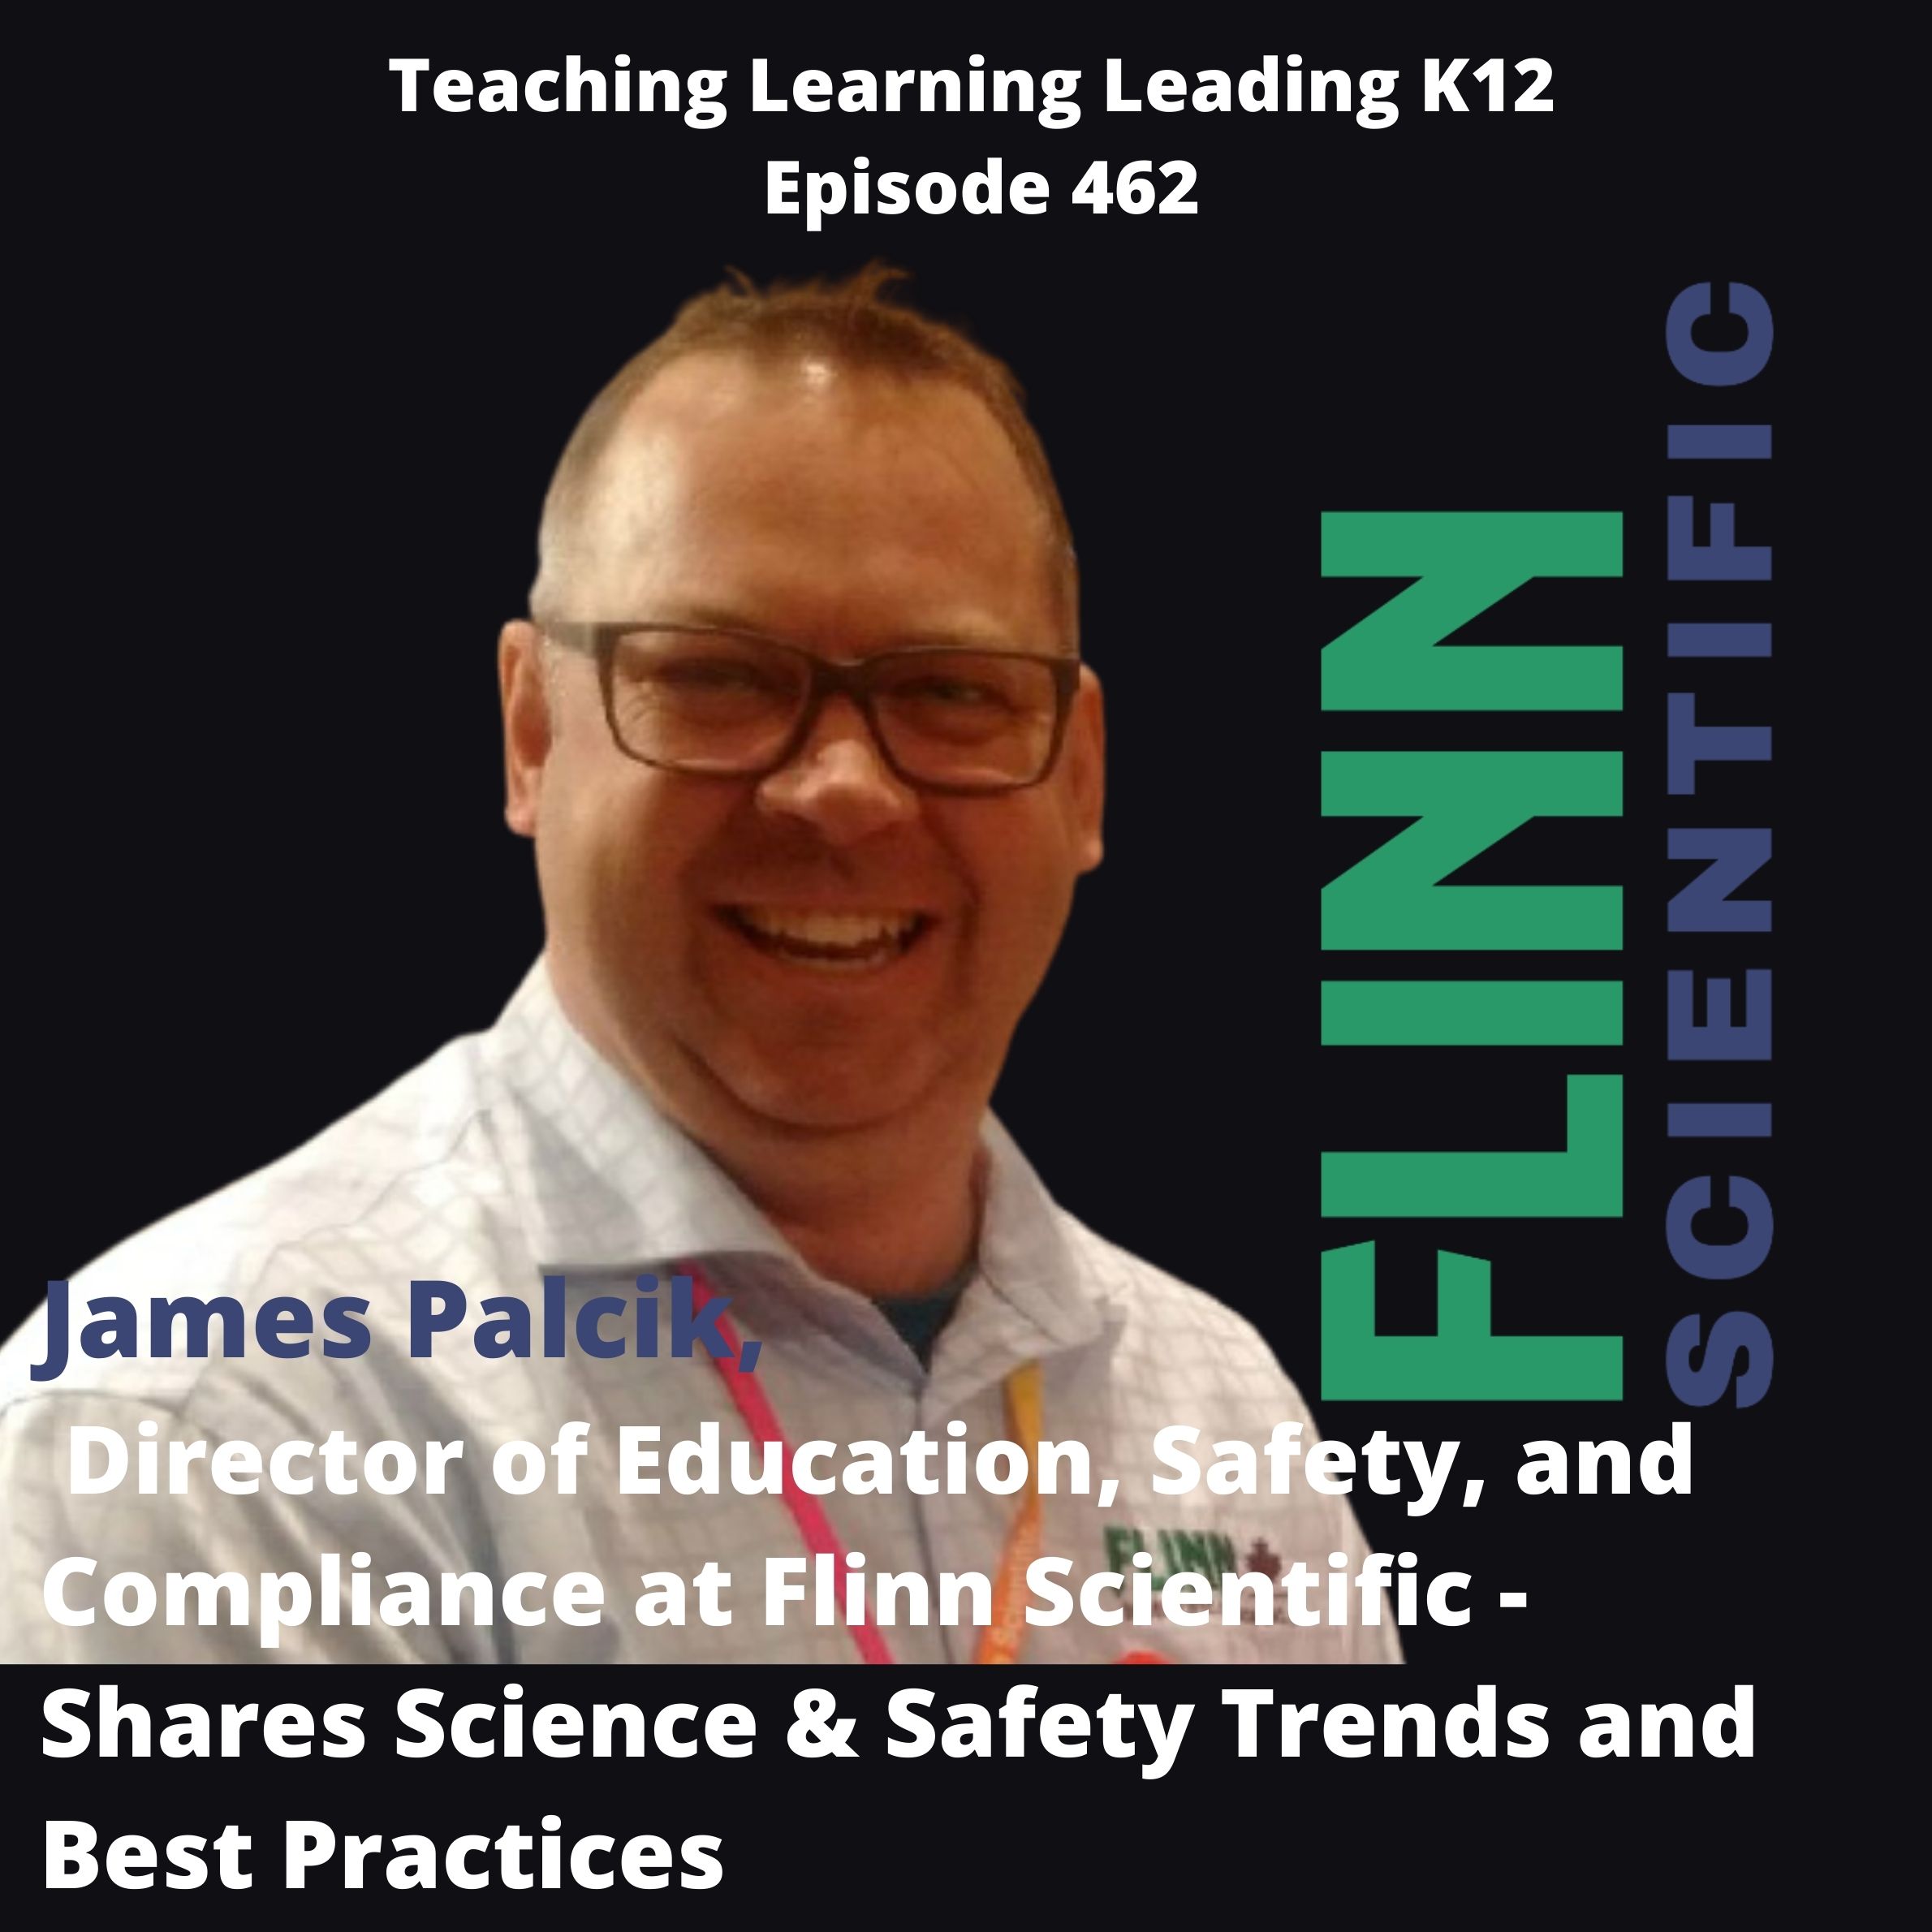 James Palcik - Director of Education, Safety, and Compliance at Flinn Scientific - Shares Science & STEM Safety Trends and Best Practices- 462